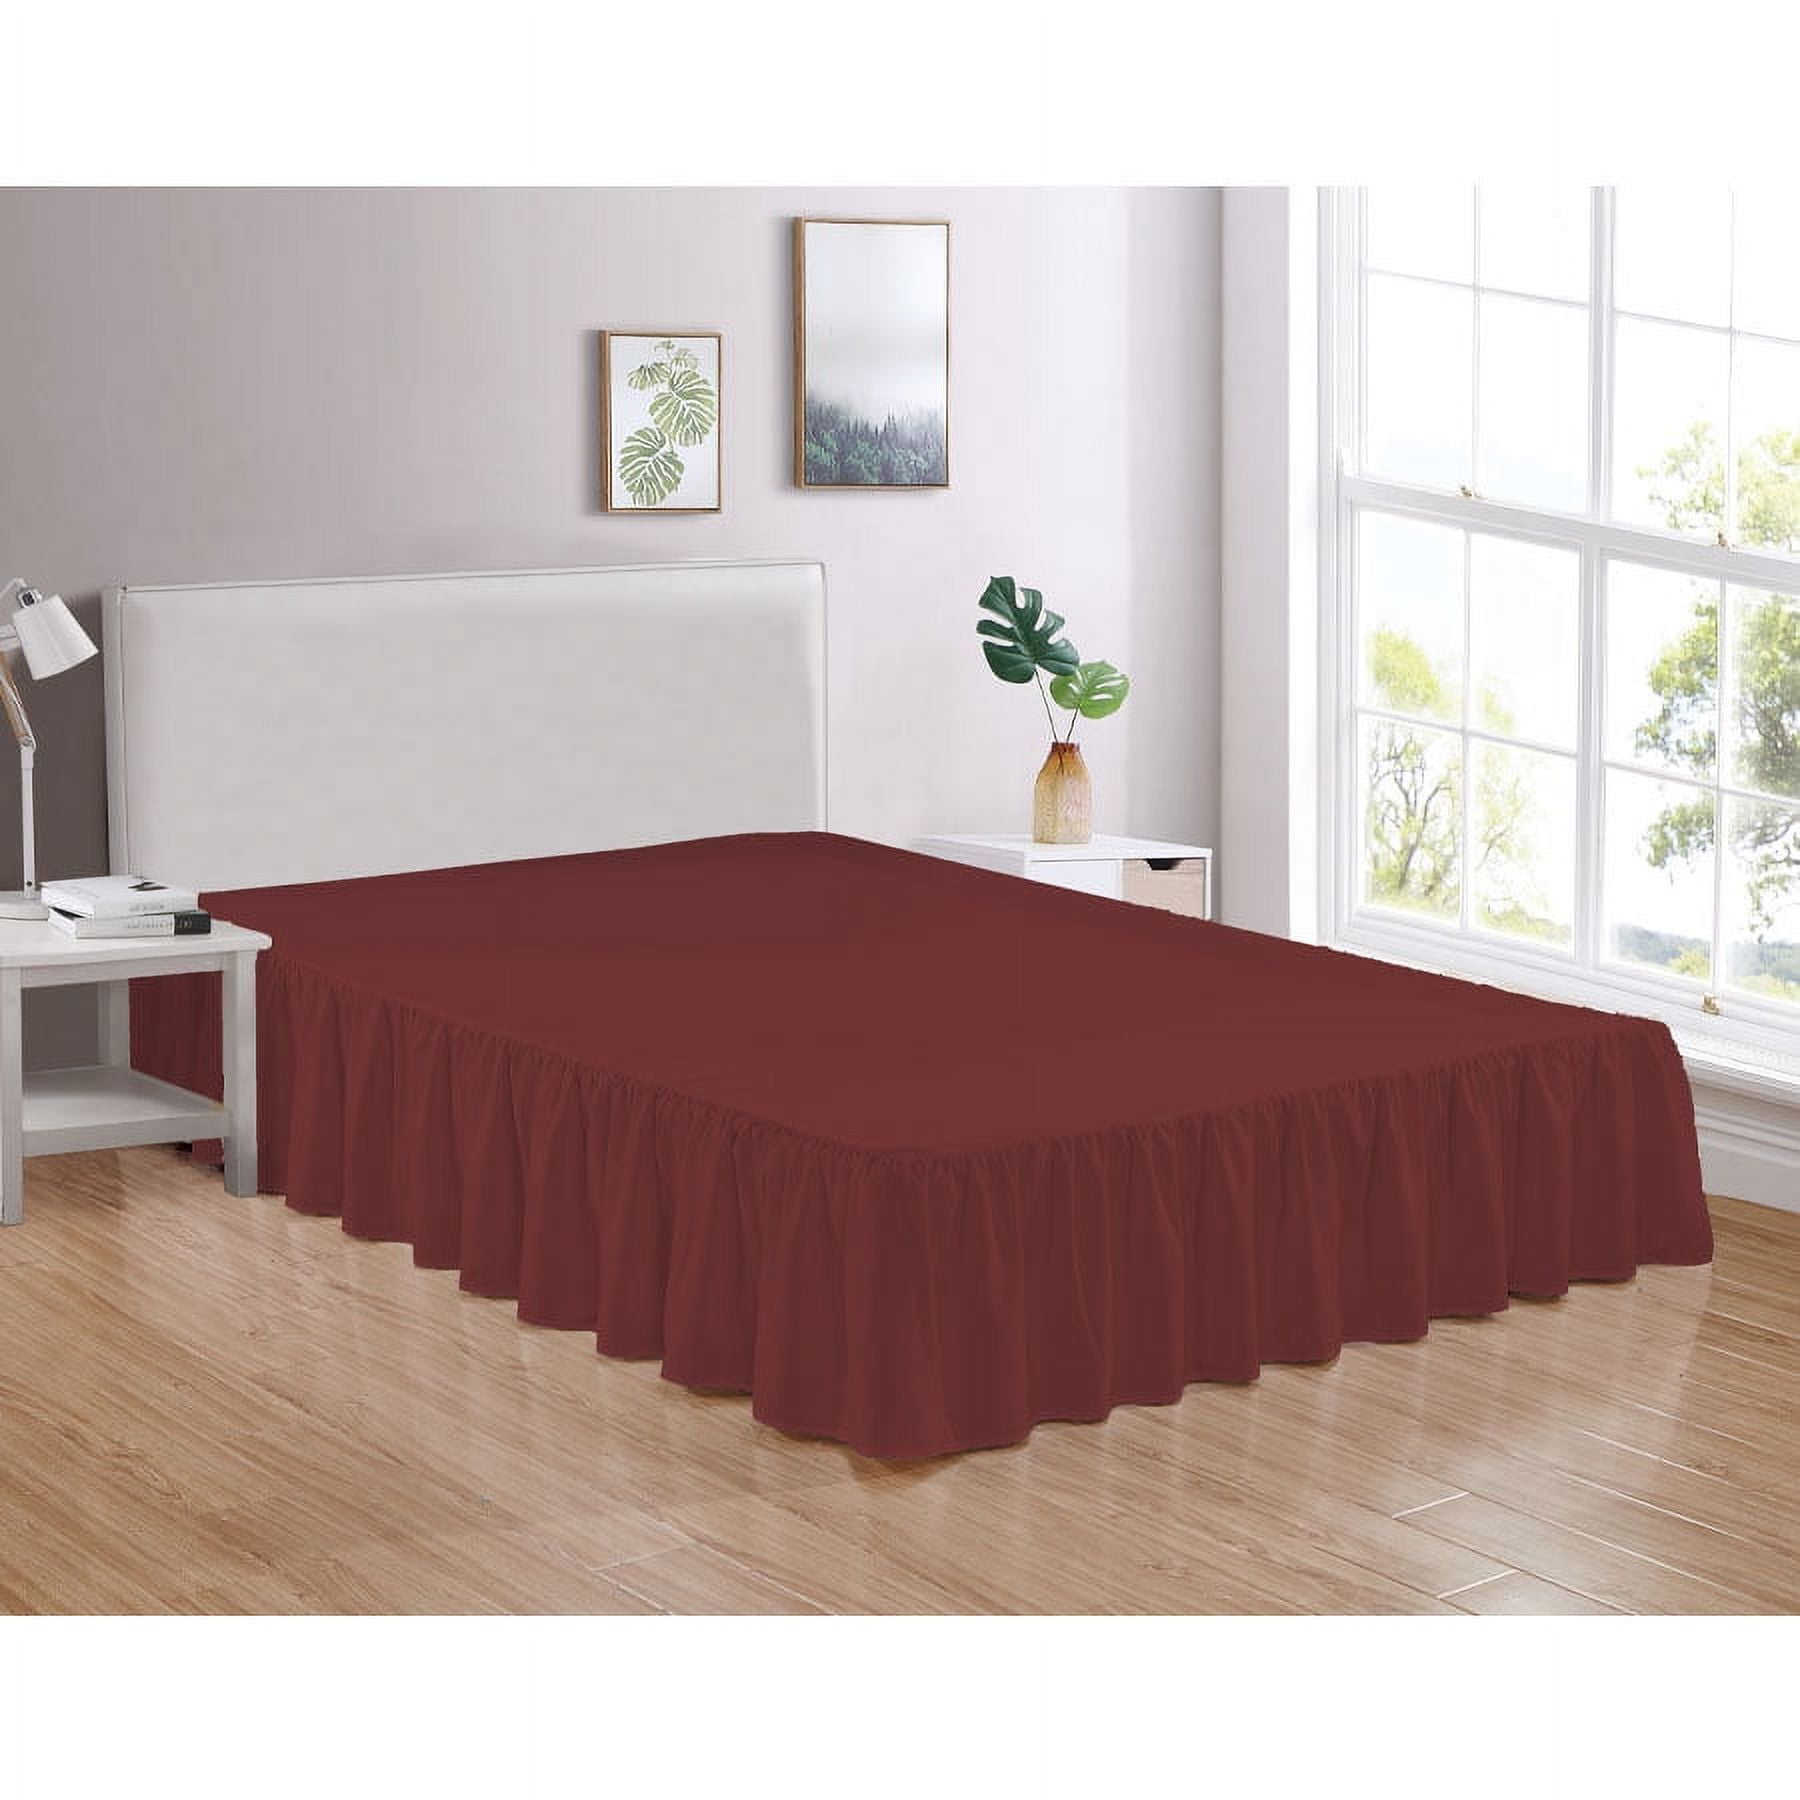 Breezy Beddings Box Pleated Bed Skirt 11 Inch Drop Easy to Put On- Burgundy  Solid Easy Care Fade & Wrinkle Resistant Microfiber (Twin XL Size) :  : Home